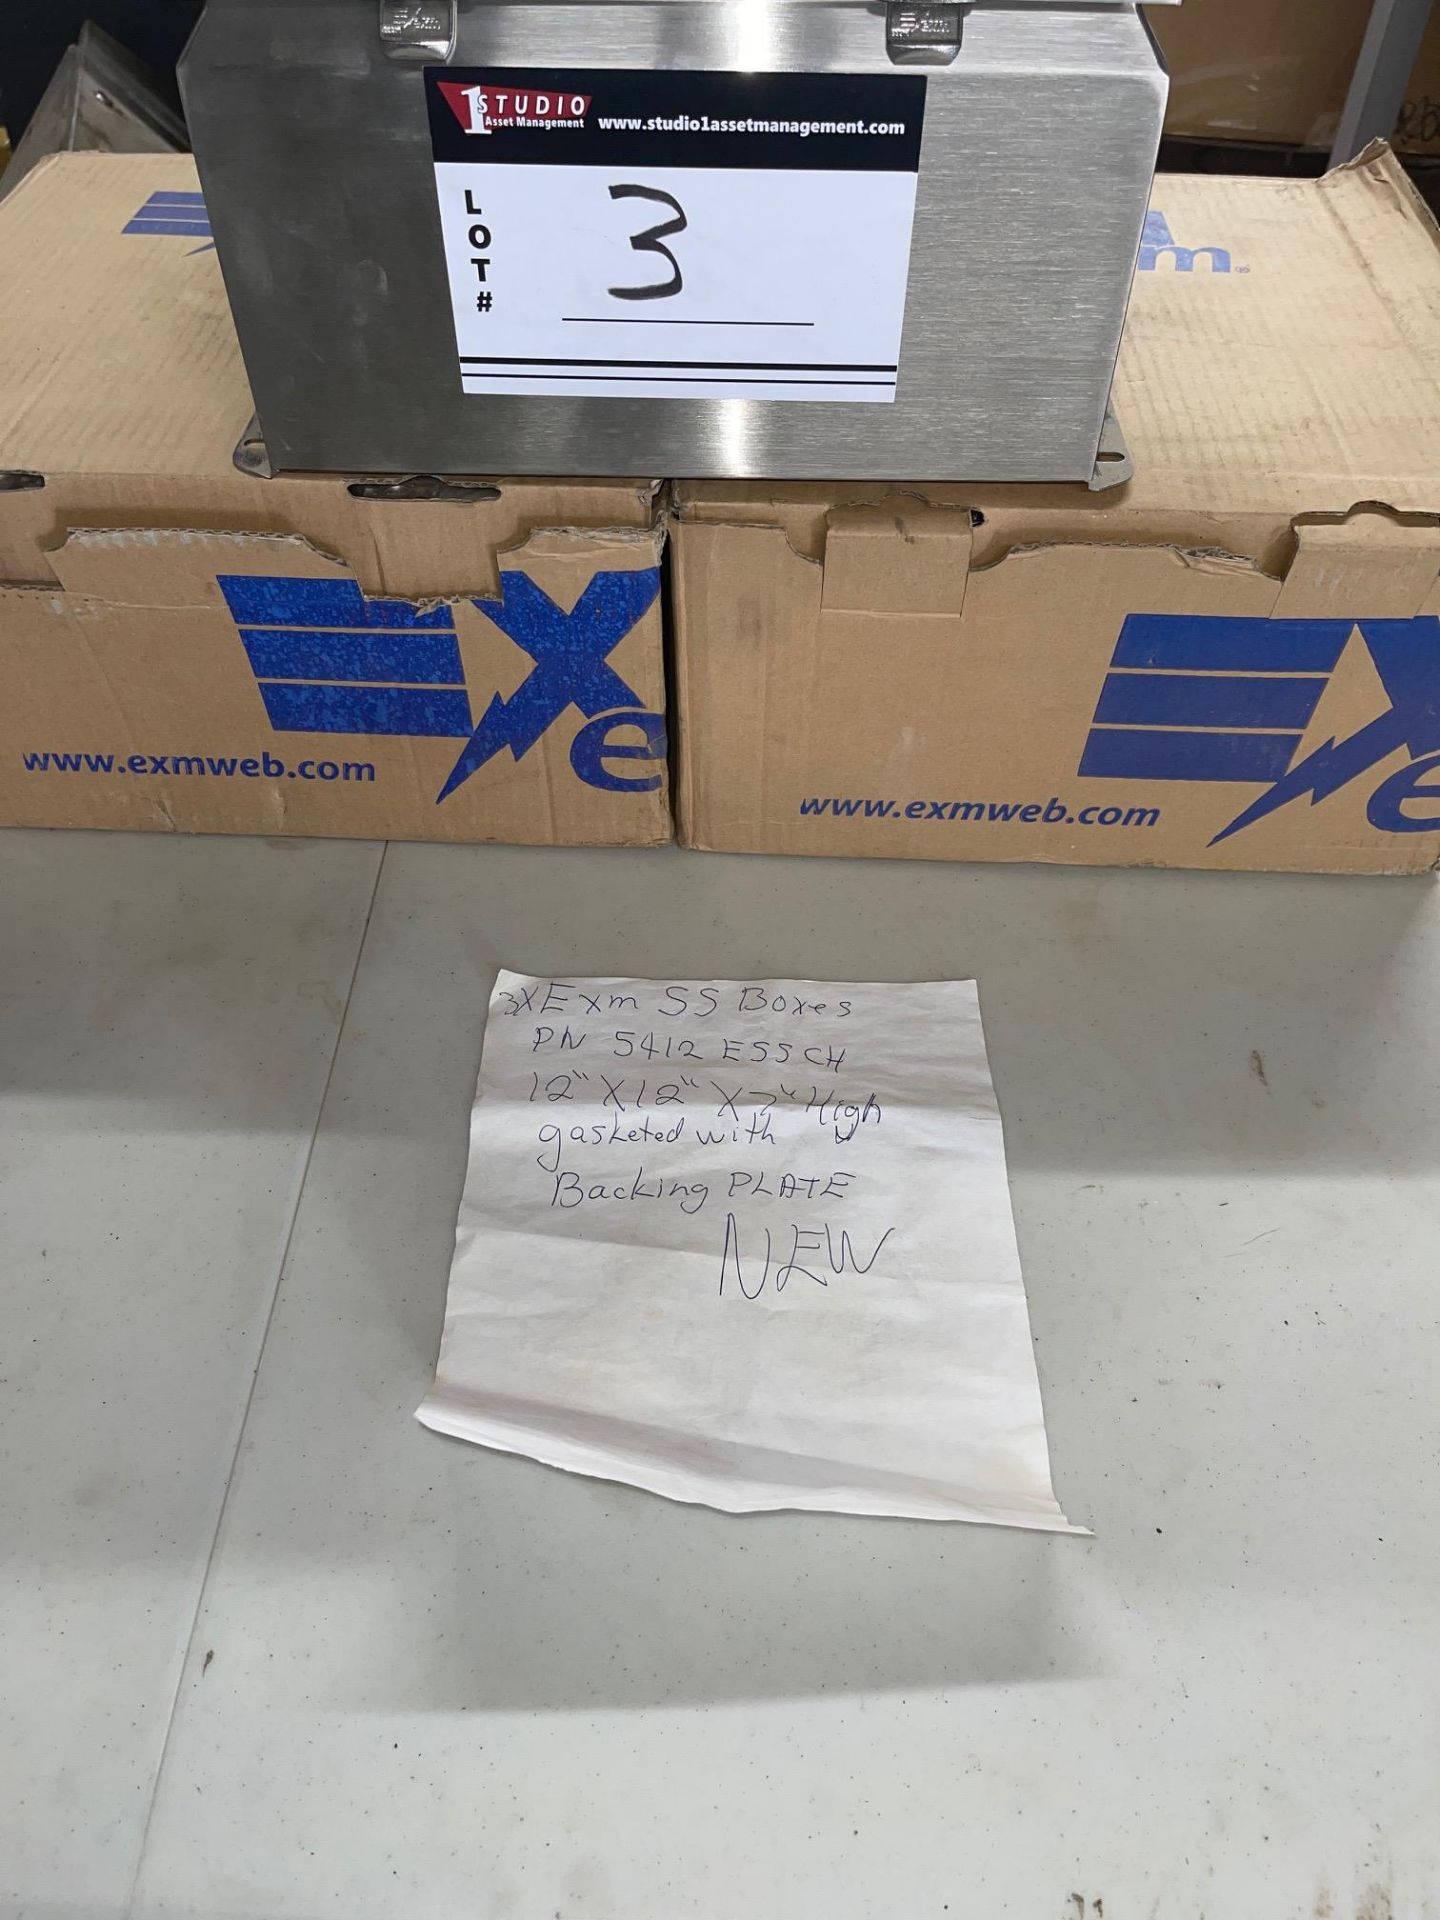 LOT/(3)EXM S/S BOXES, PN 5412ESSCH, 12” X 12” X 7”H, GASKET W/BACKING PLATE,(NEW) - Image 2 of 4